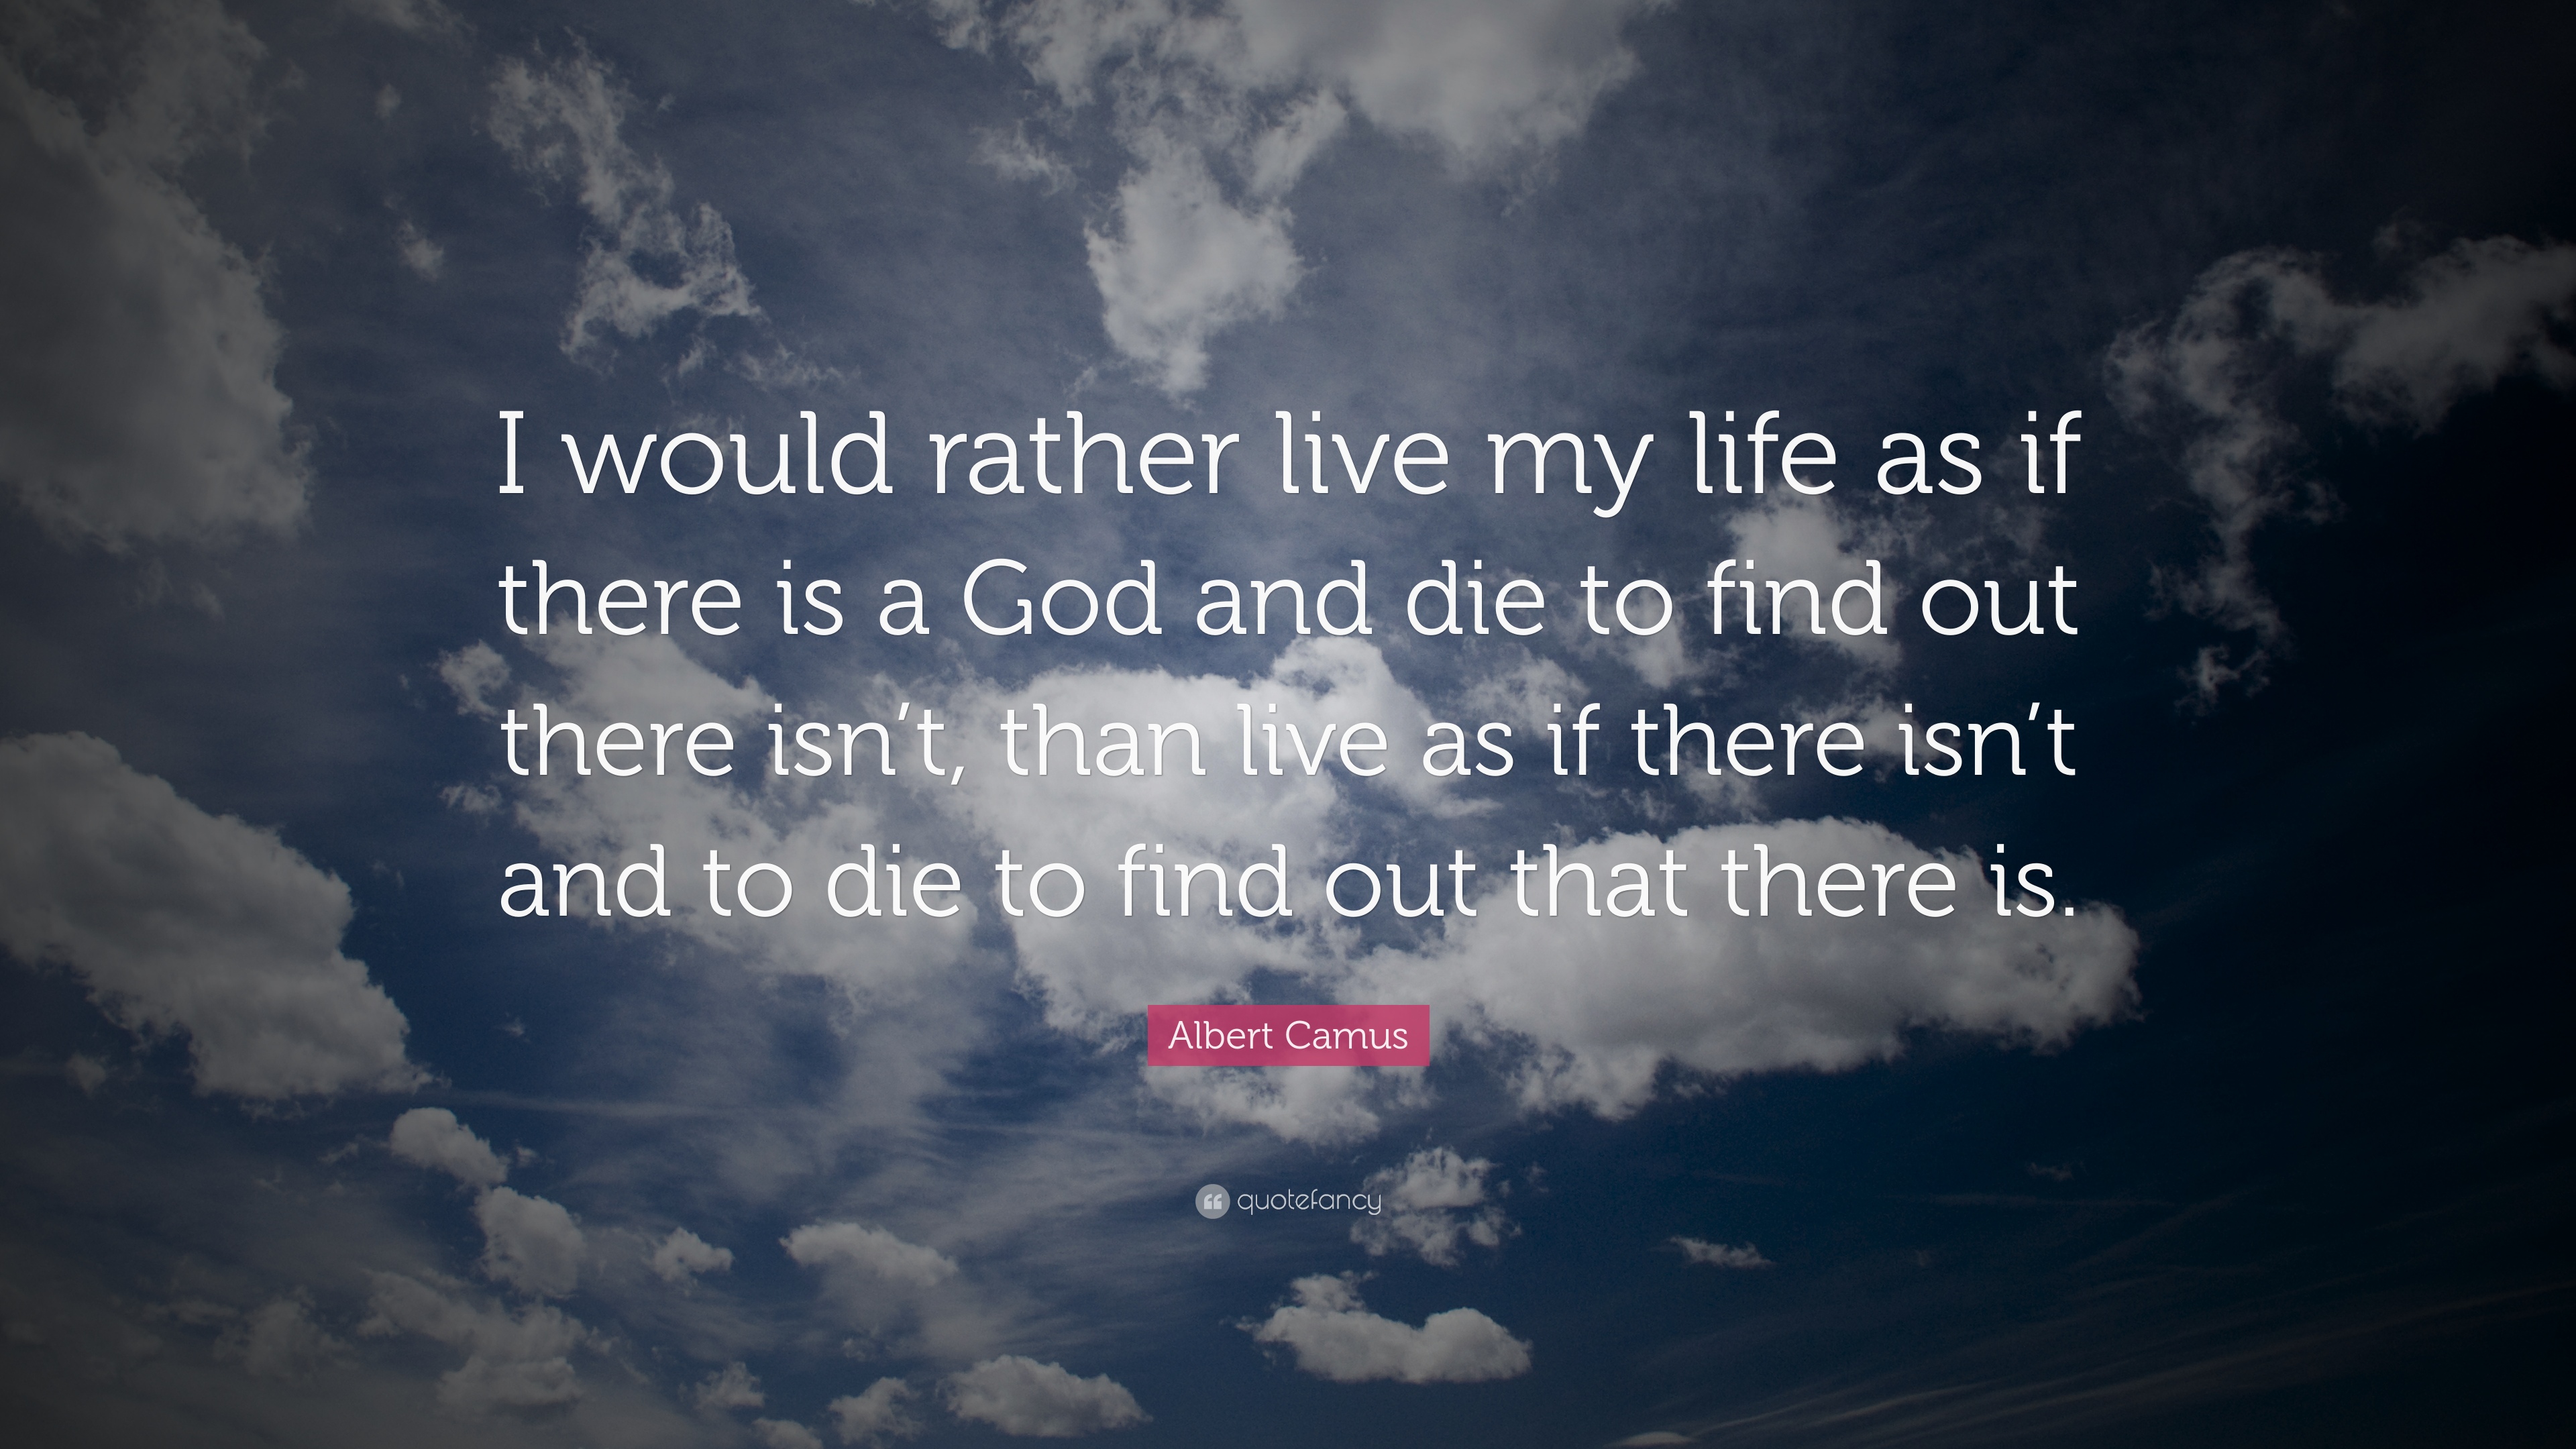 Albert Camus Quote: “I would rather live my life as if there